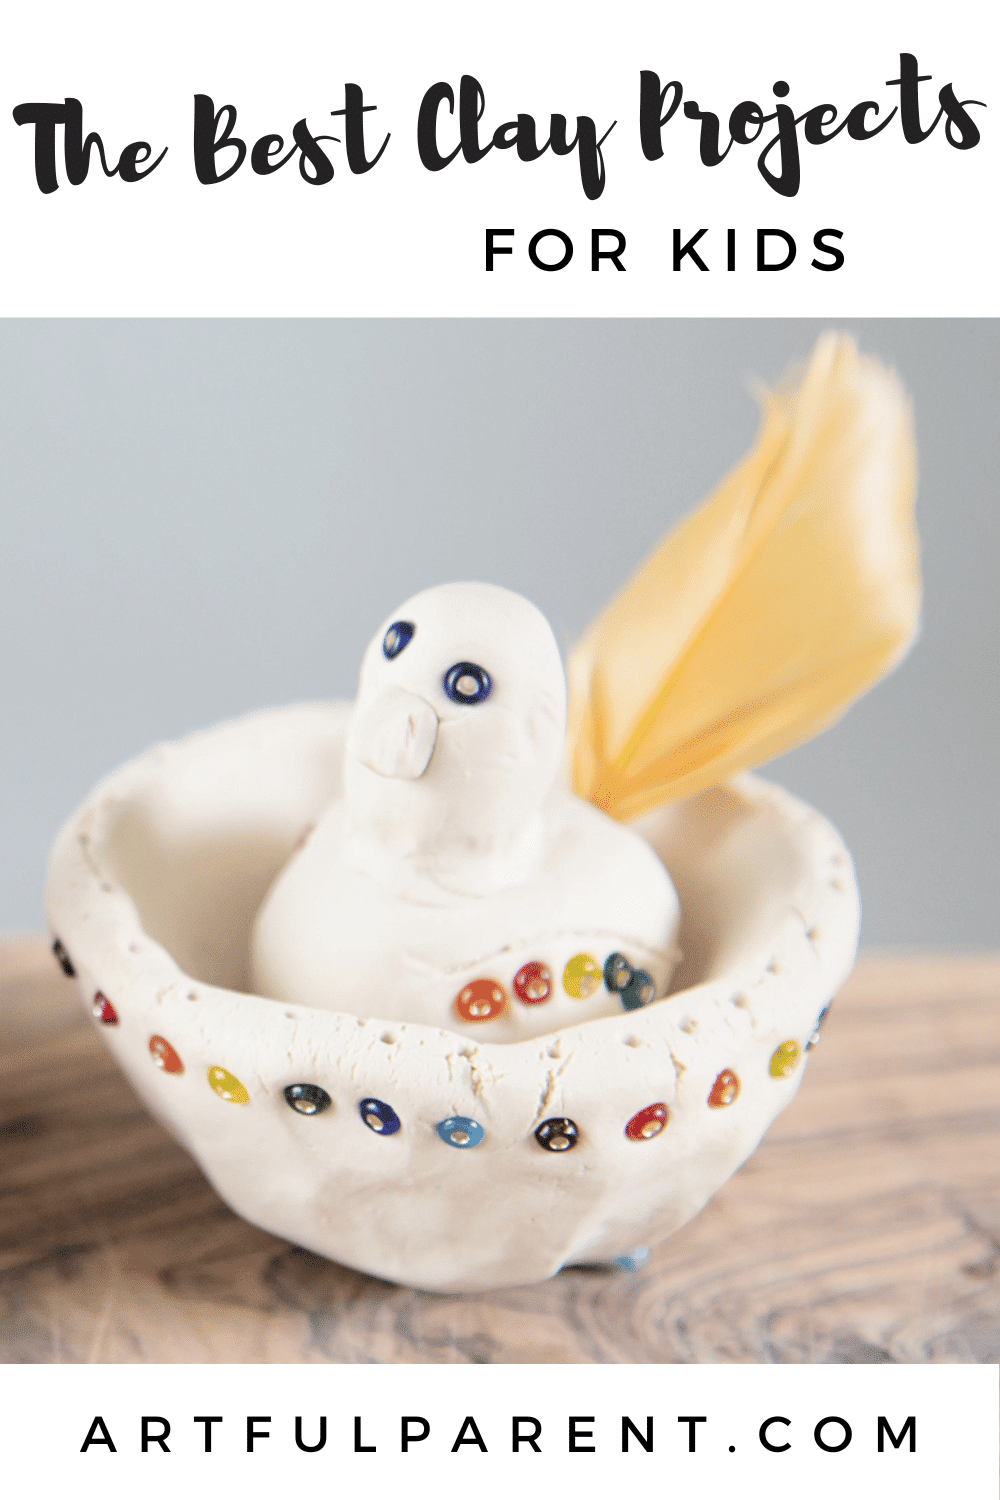 clay projects for kids pinterest